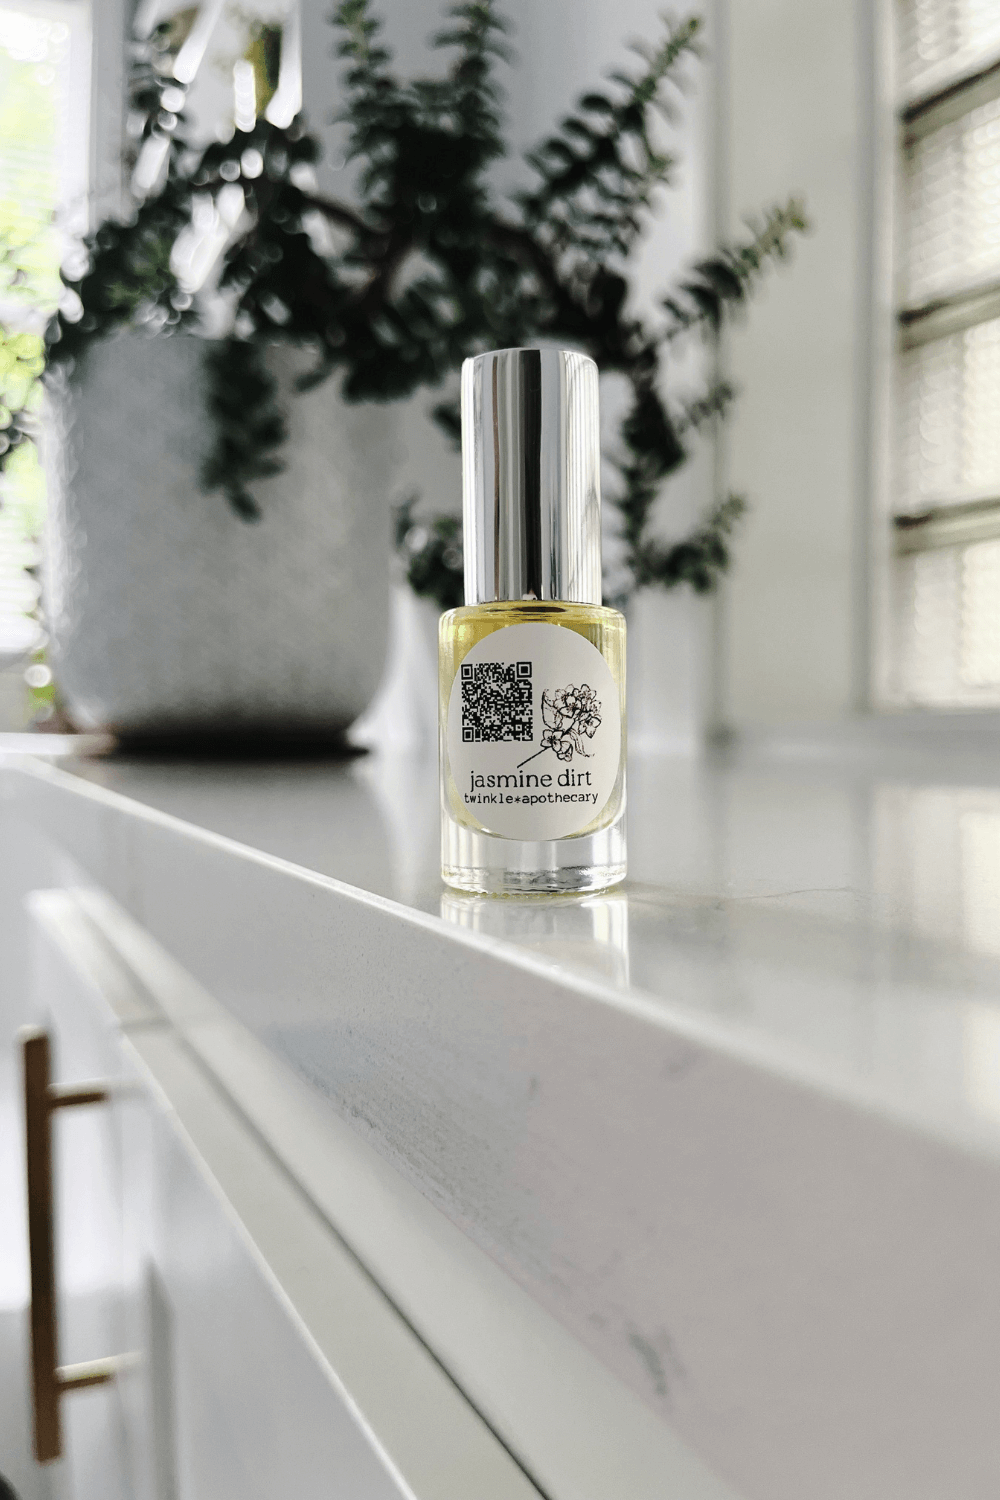 5 ml bottle of jasmine dirt organic perfume by twinkle apothecary 